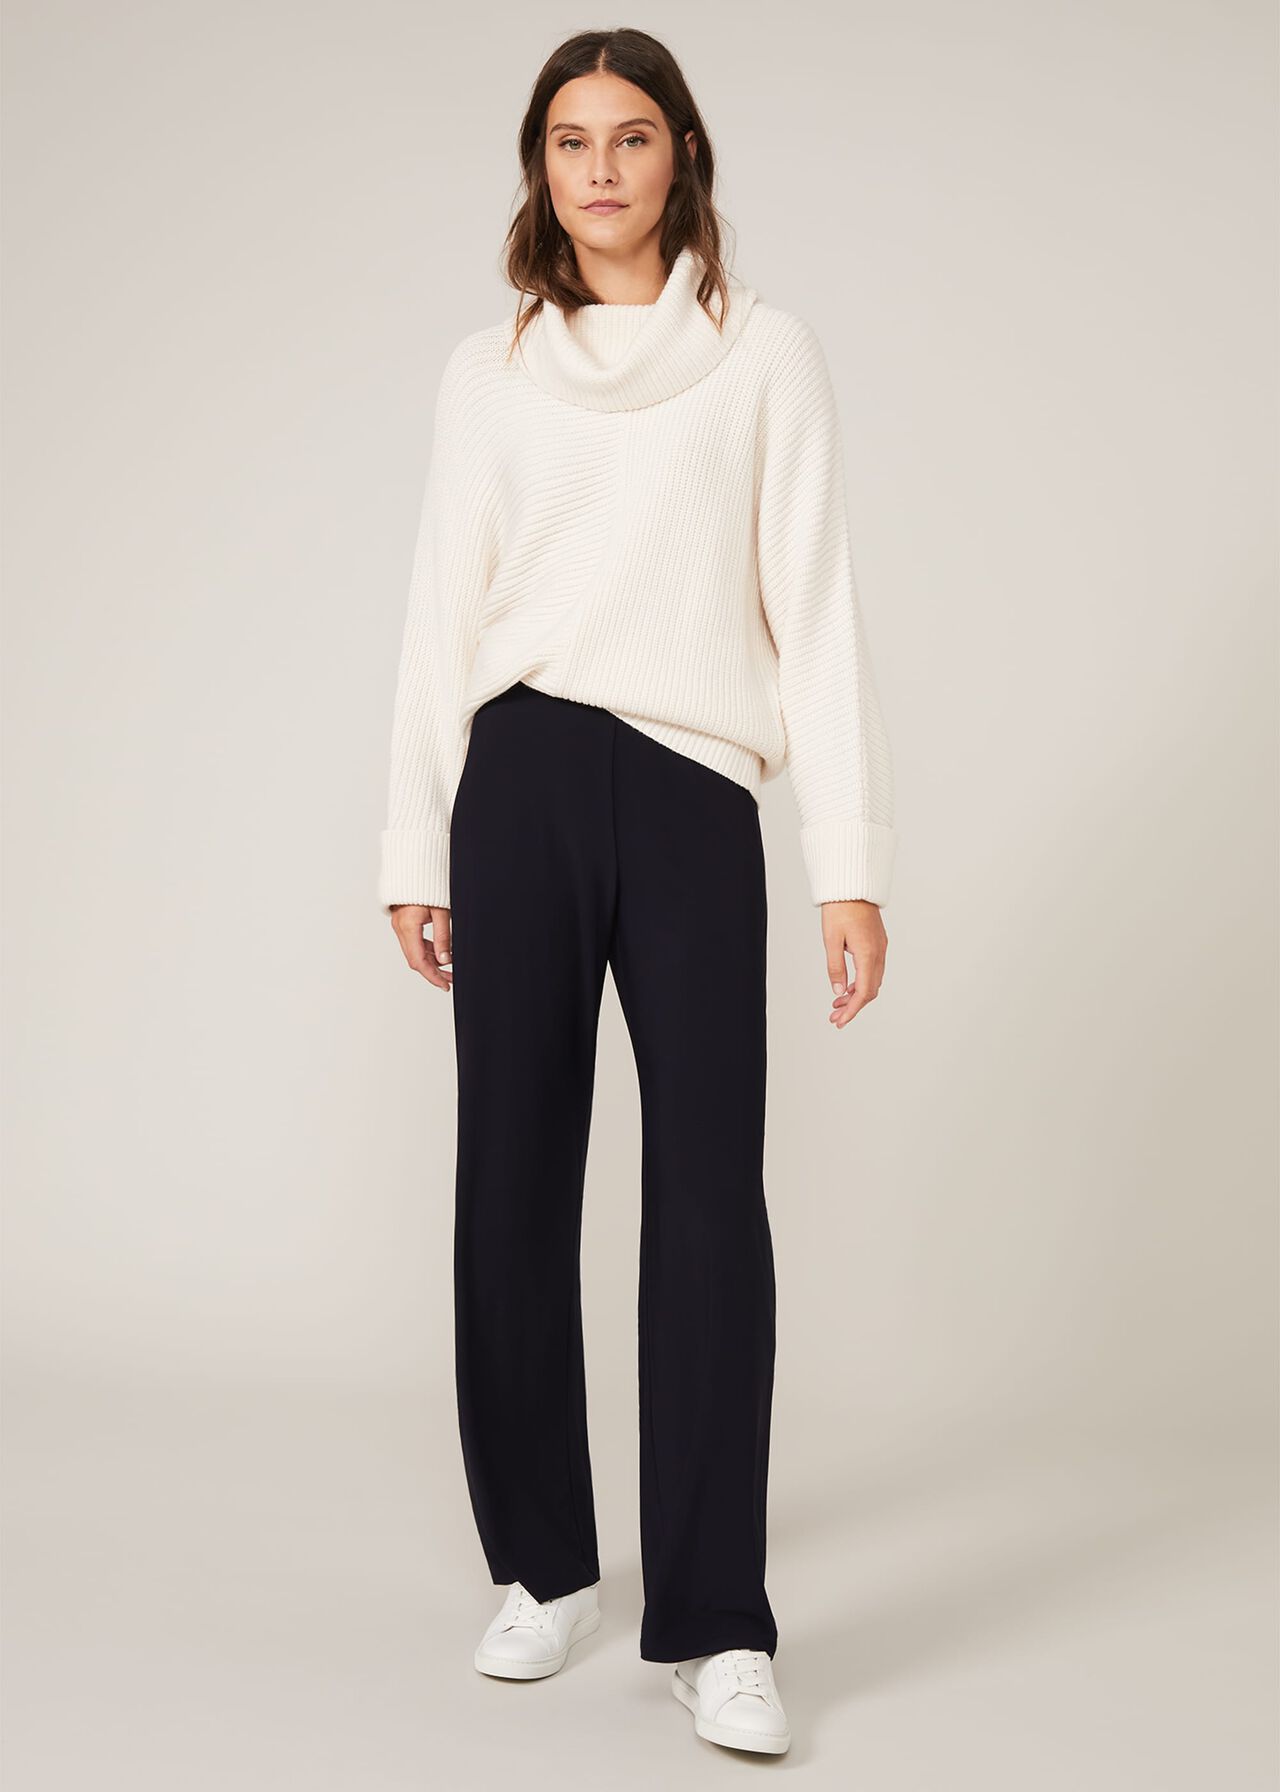 Corinne Jersey Trousers